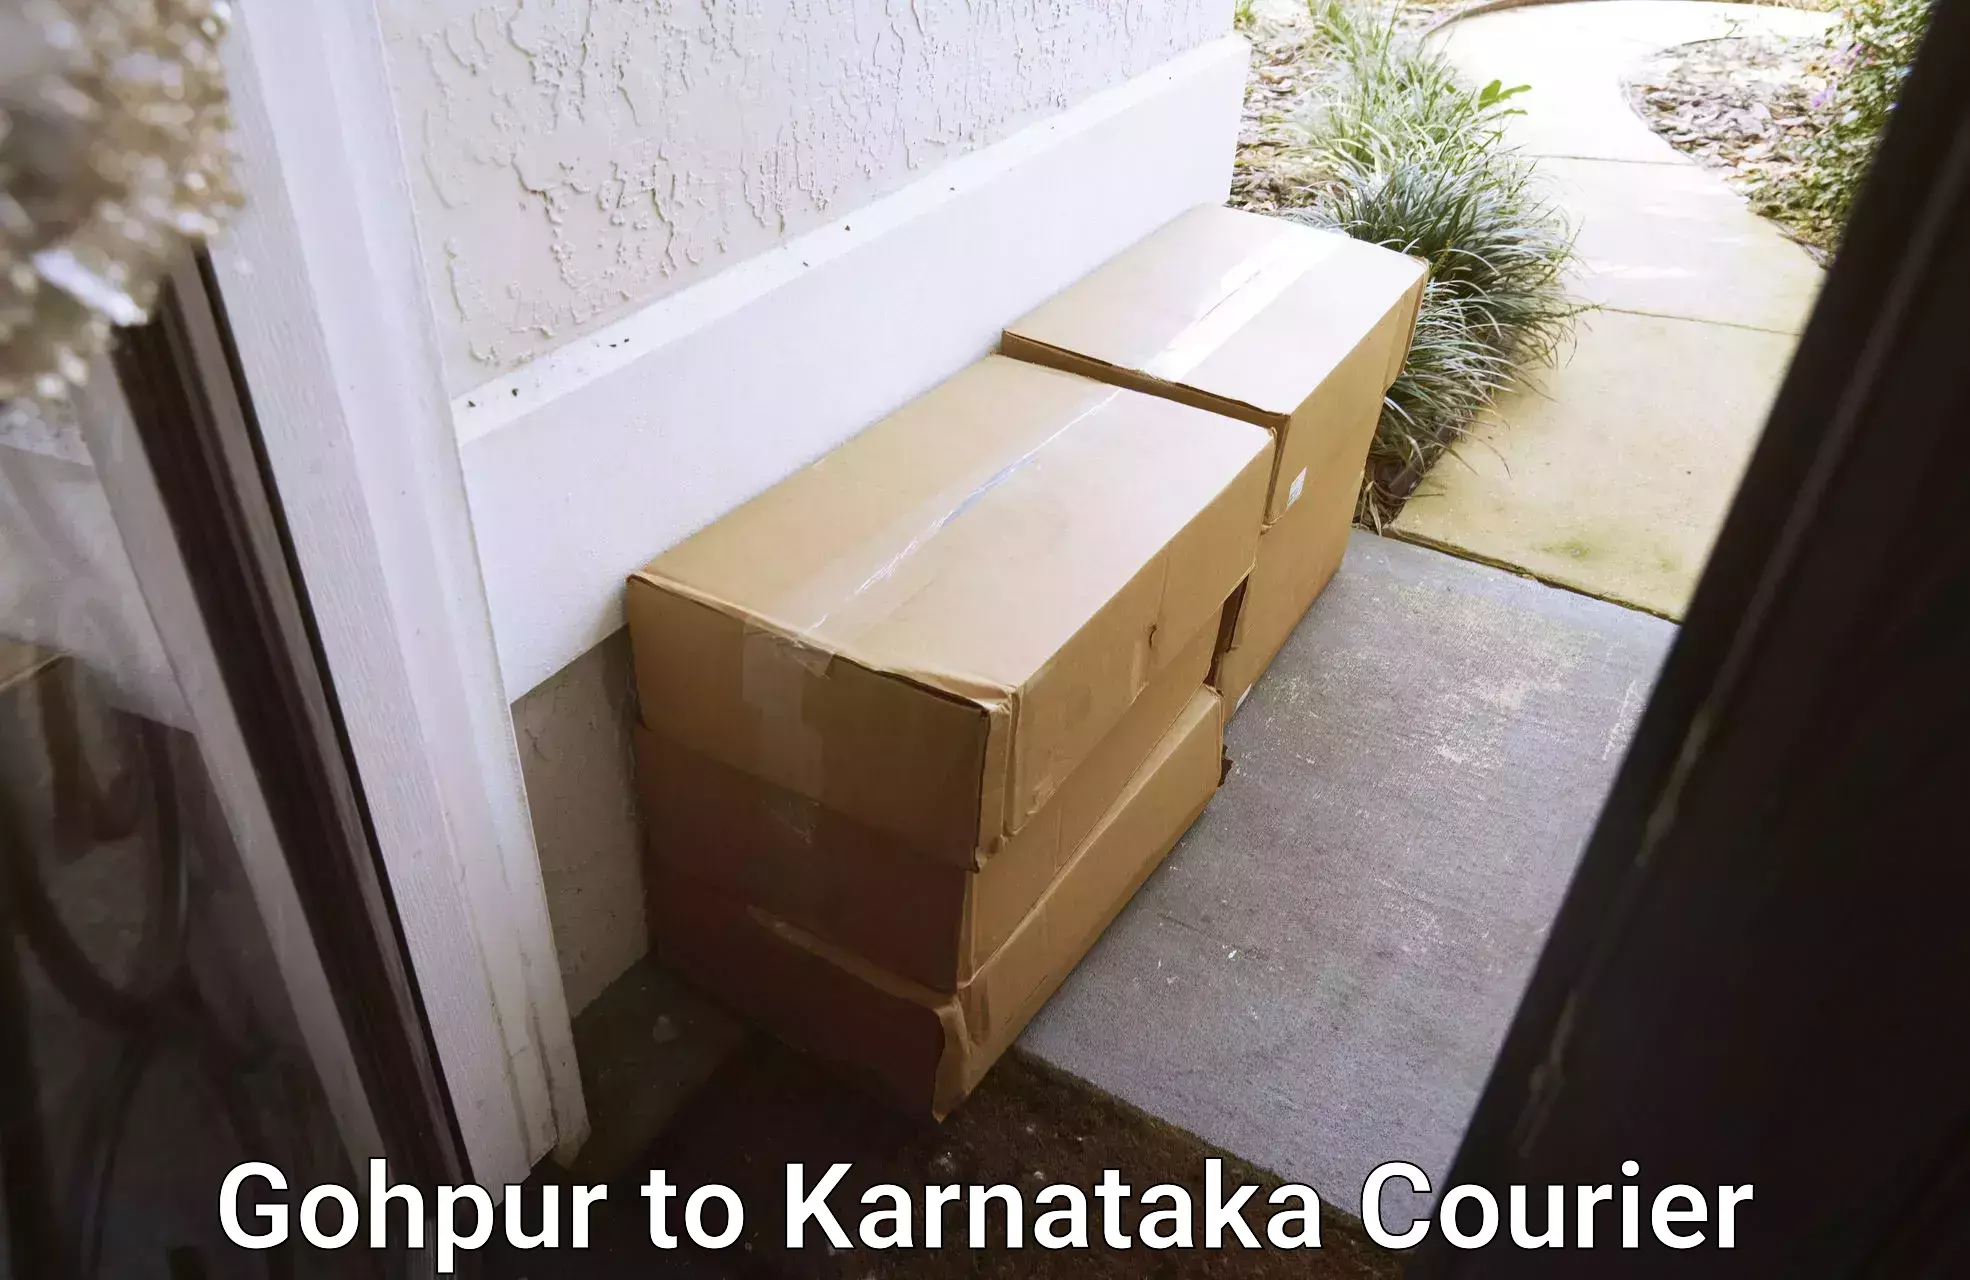 On-call courier service Gohpur to Hospet